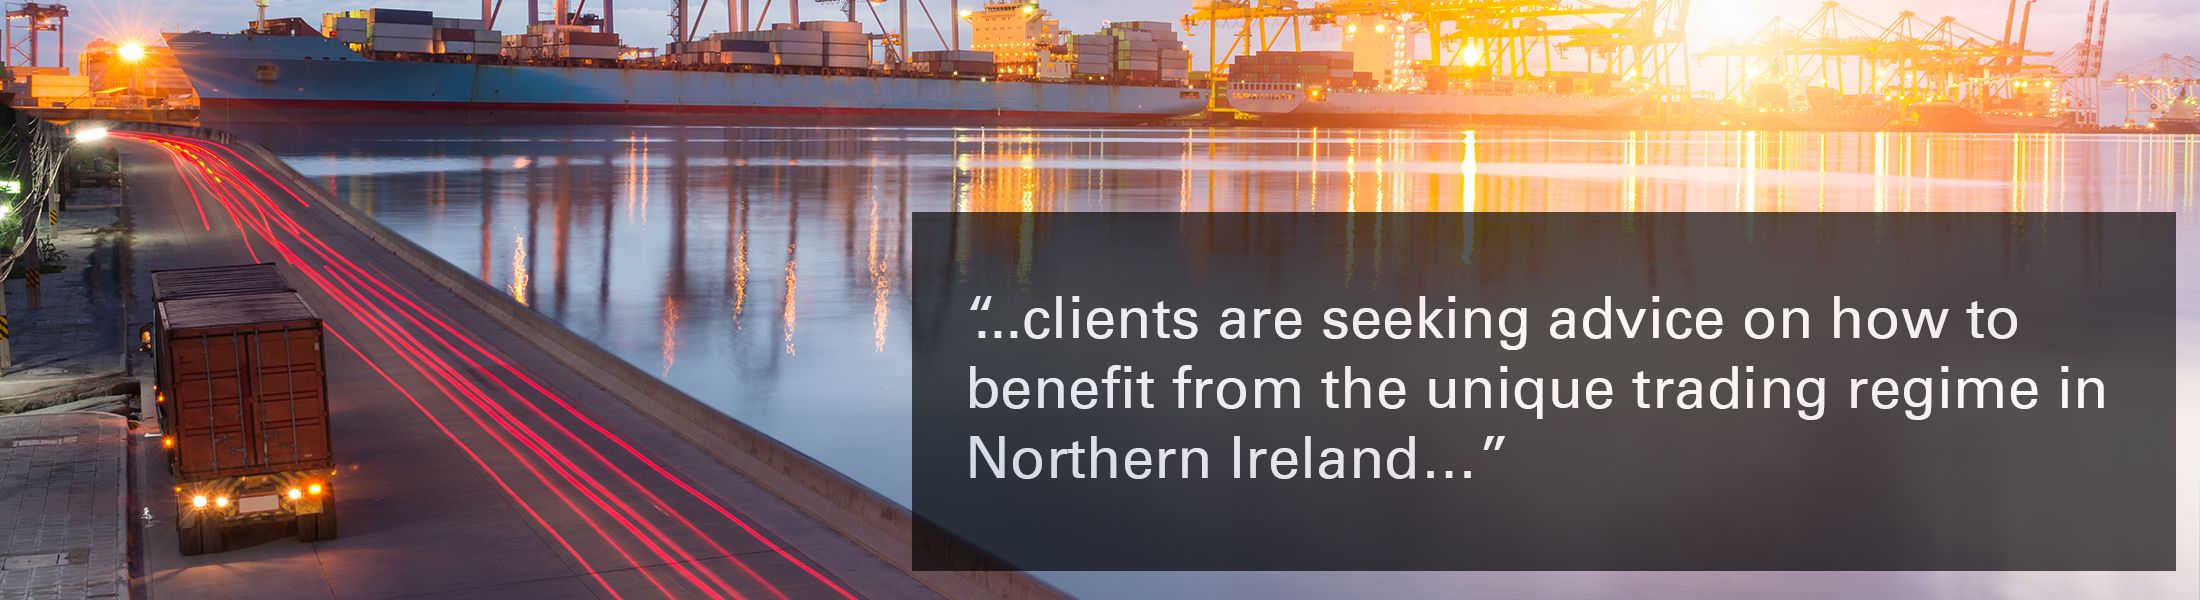 Image of Belfast City Hall with quote overlaid "Unfettered access to the GB market from Northern Ireland, combined with the continuation of tariff free trading with the EU...does bring potential benefits.” 